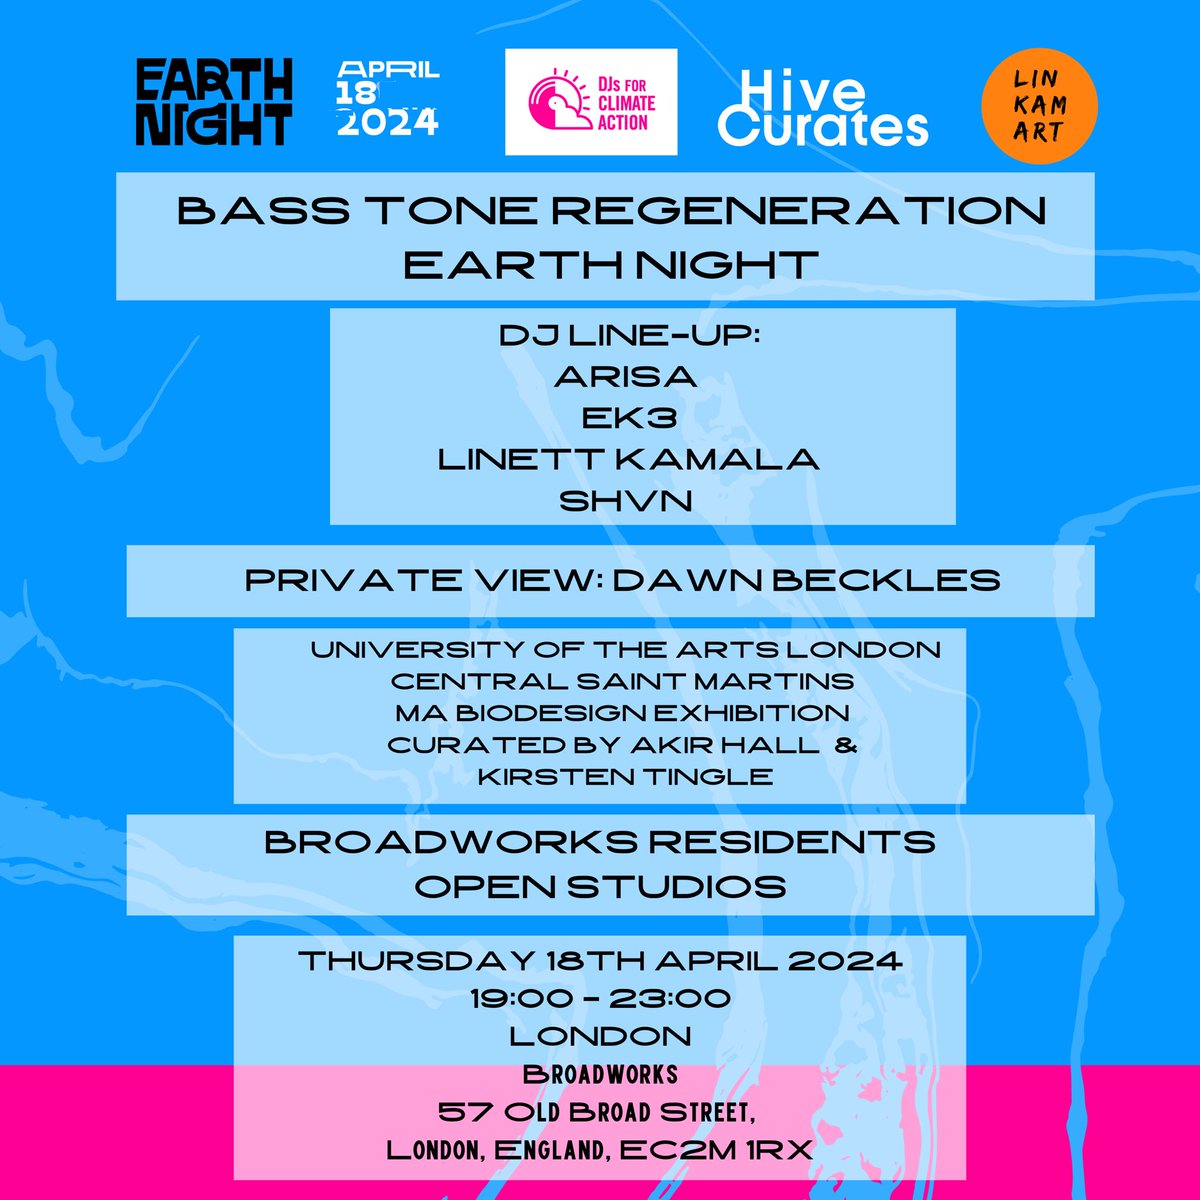 🚨EXCITING ANNOUNCEMENT! BASS TONE REGENERATION: EARTH NIGHT 🌍 🔊🌱by @lin_kam_art with Hive Curates as part of @DJs4CA Thurs 18 Apr ‘24 - 19:00-23:00 Broadworks, 57 Old Broad Street, London, EC2M 1RX Tickets: designmynight.com/london/whats-o…